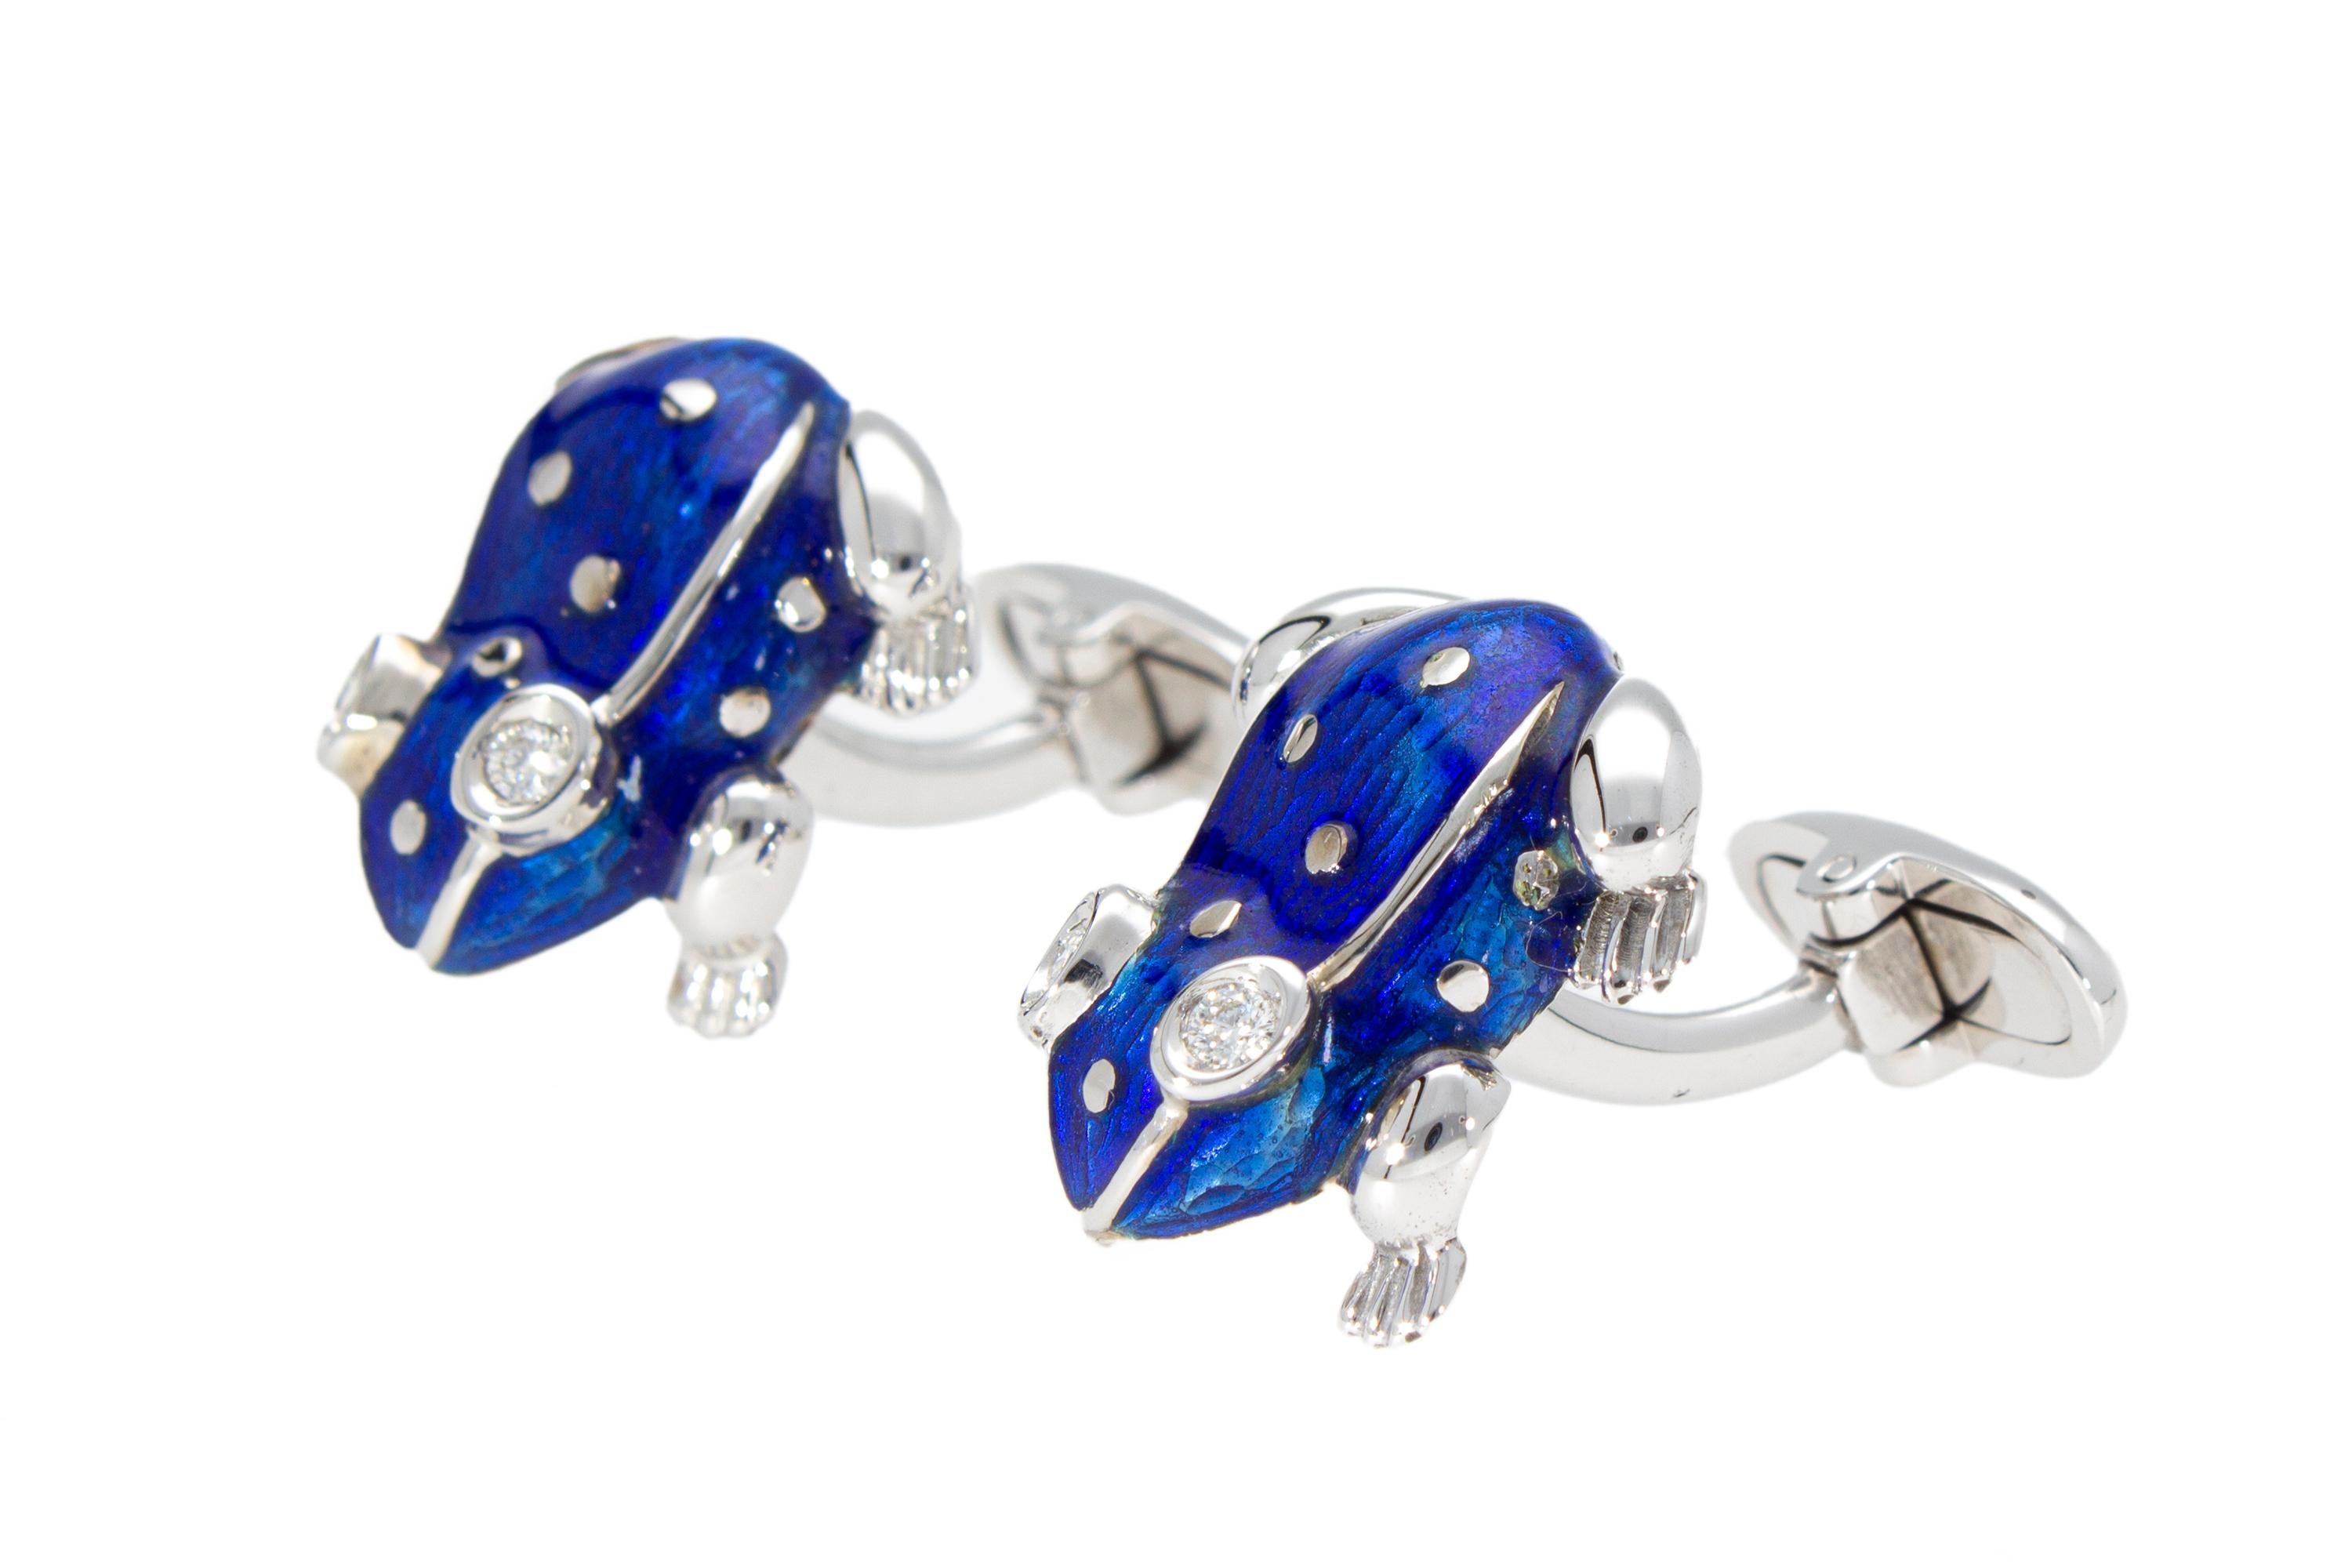 18 Kt White Gold with Blu Enamel Diamonds Frog Cufflinks Handcraft Made in Italy For Sale 1